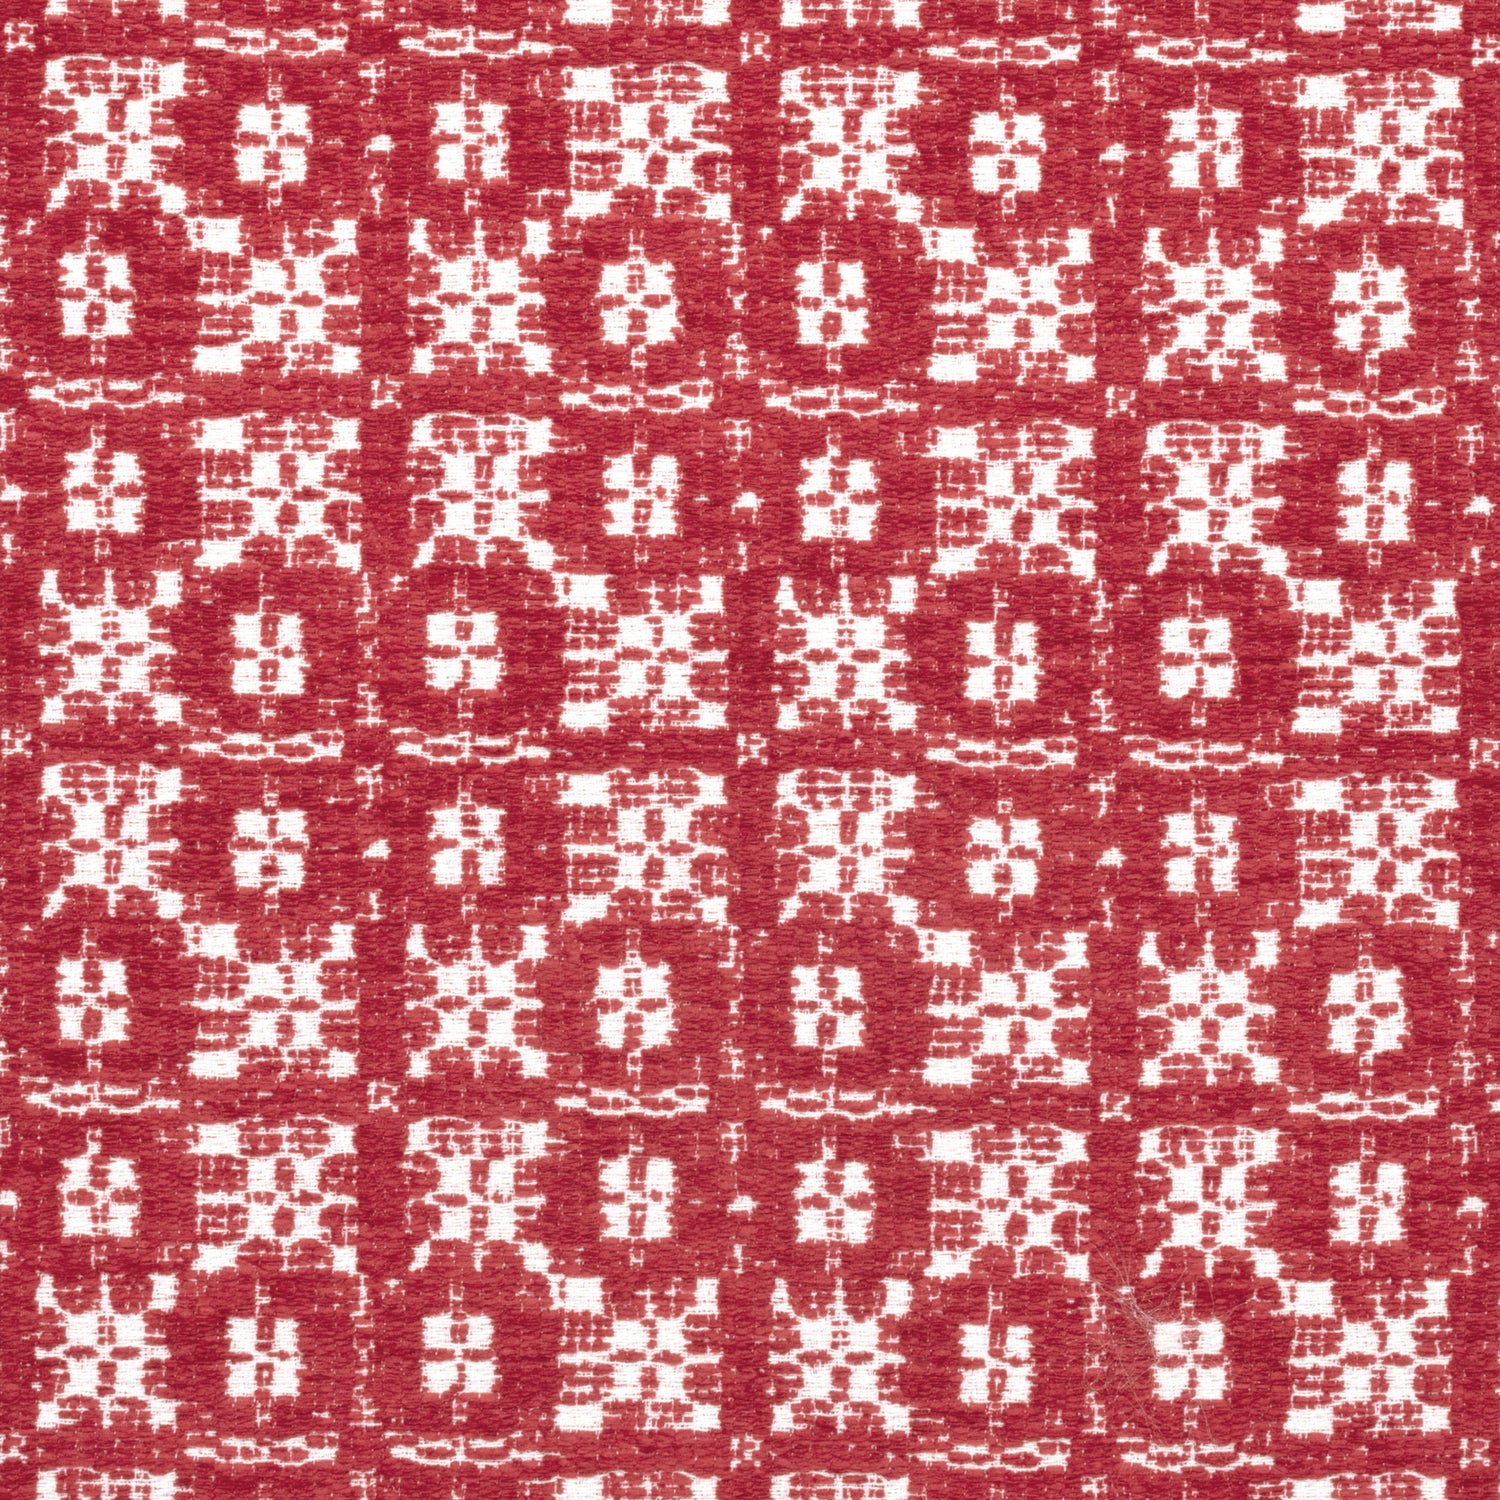 Brimfield fabric in cranberry color - pattern number W73497 - by Thibaut in the Landmark collection